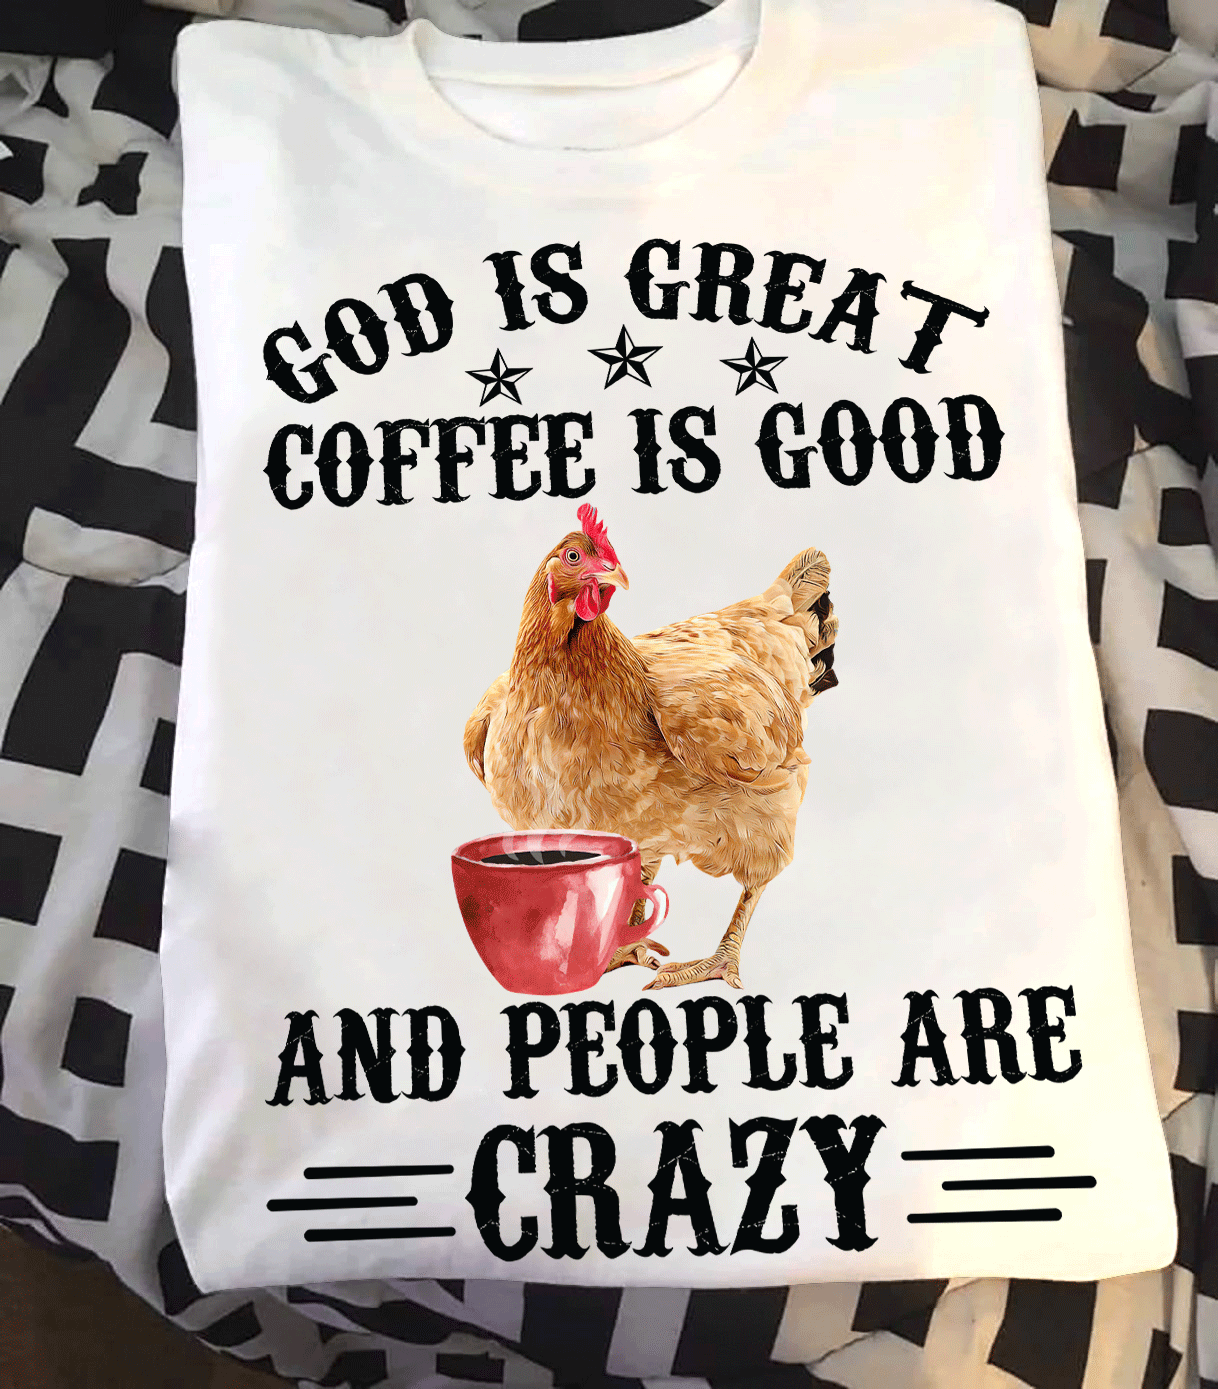 God is great, coffee is good and people are crazy - Chicken and coffee